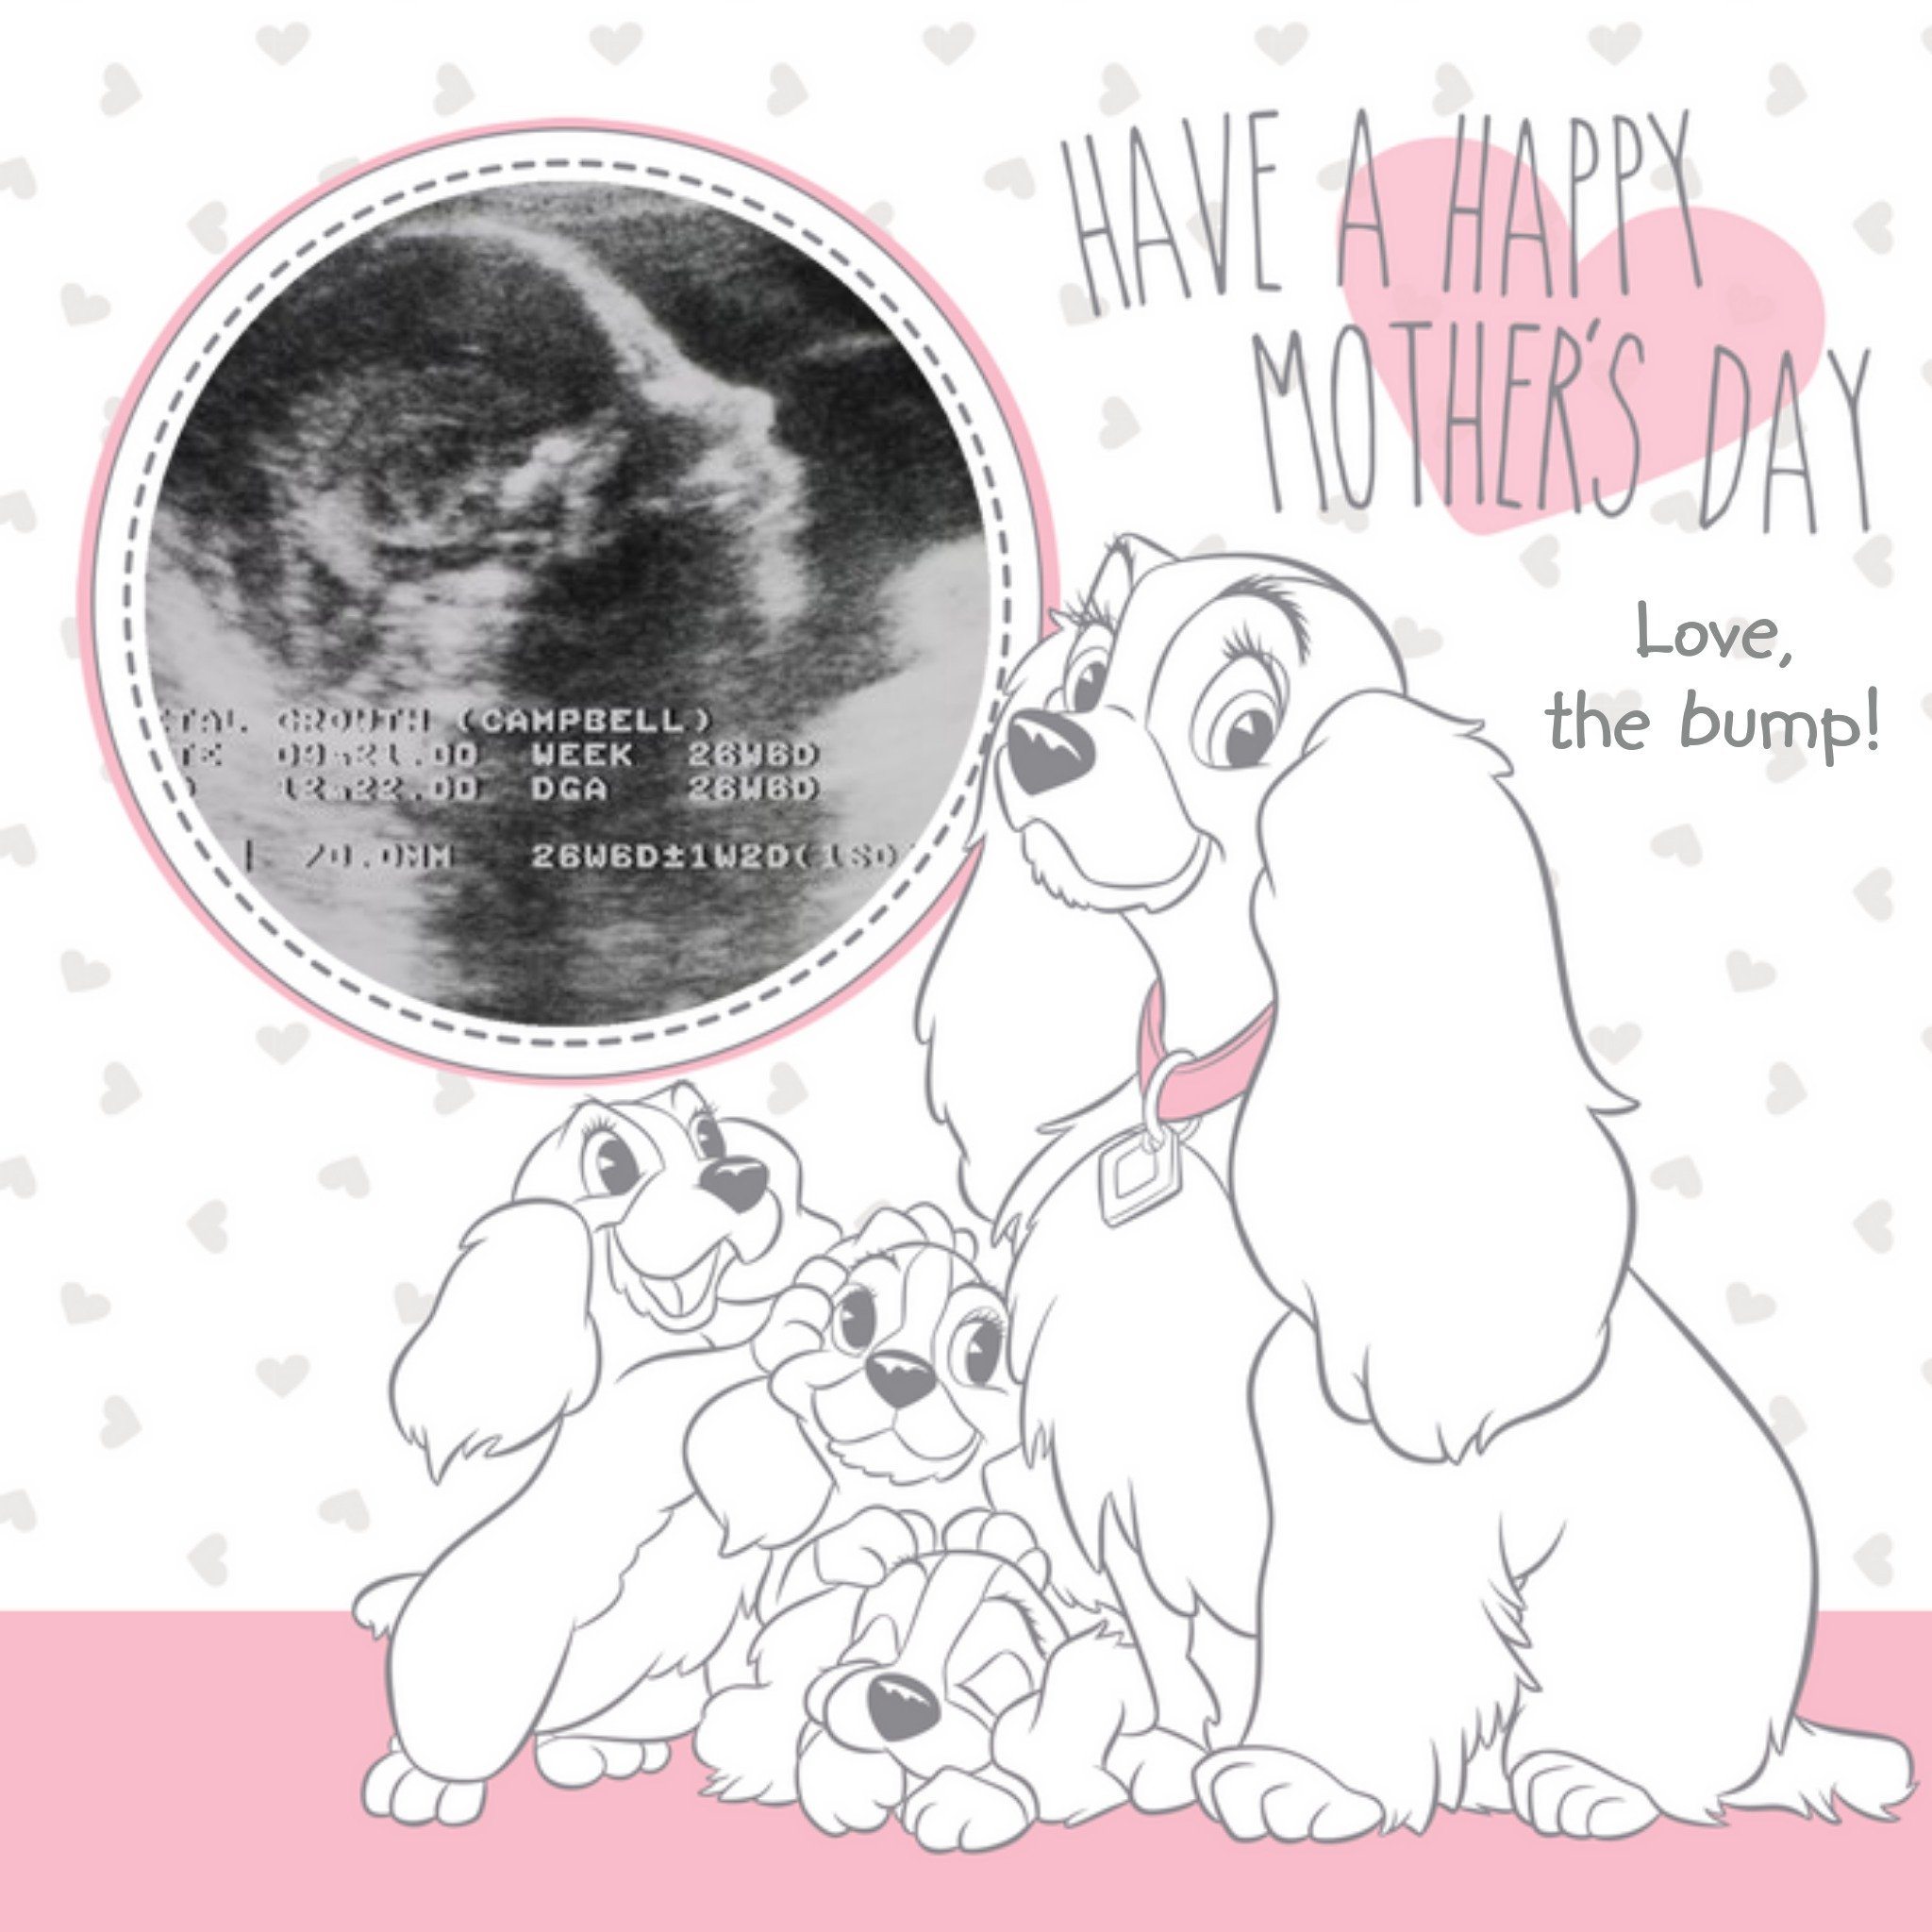 Disney Lady And The Tramp Mothers Day Photo Card, Square